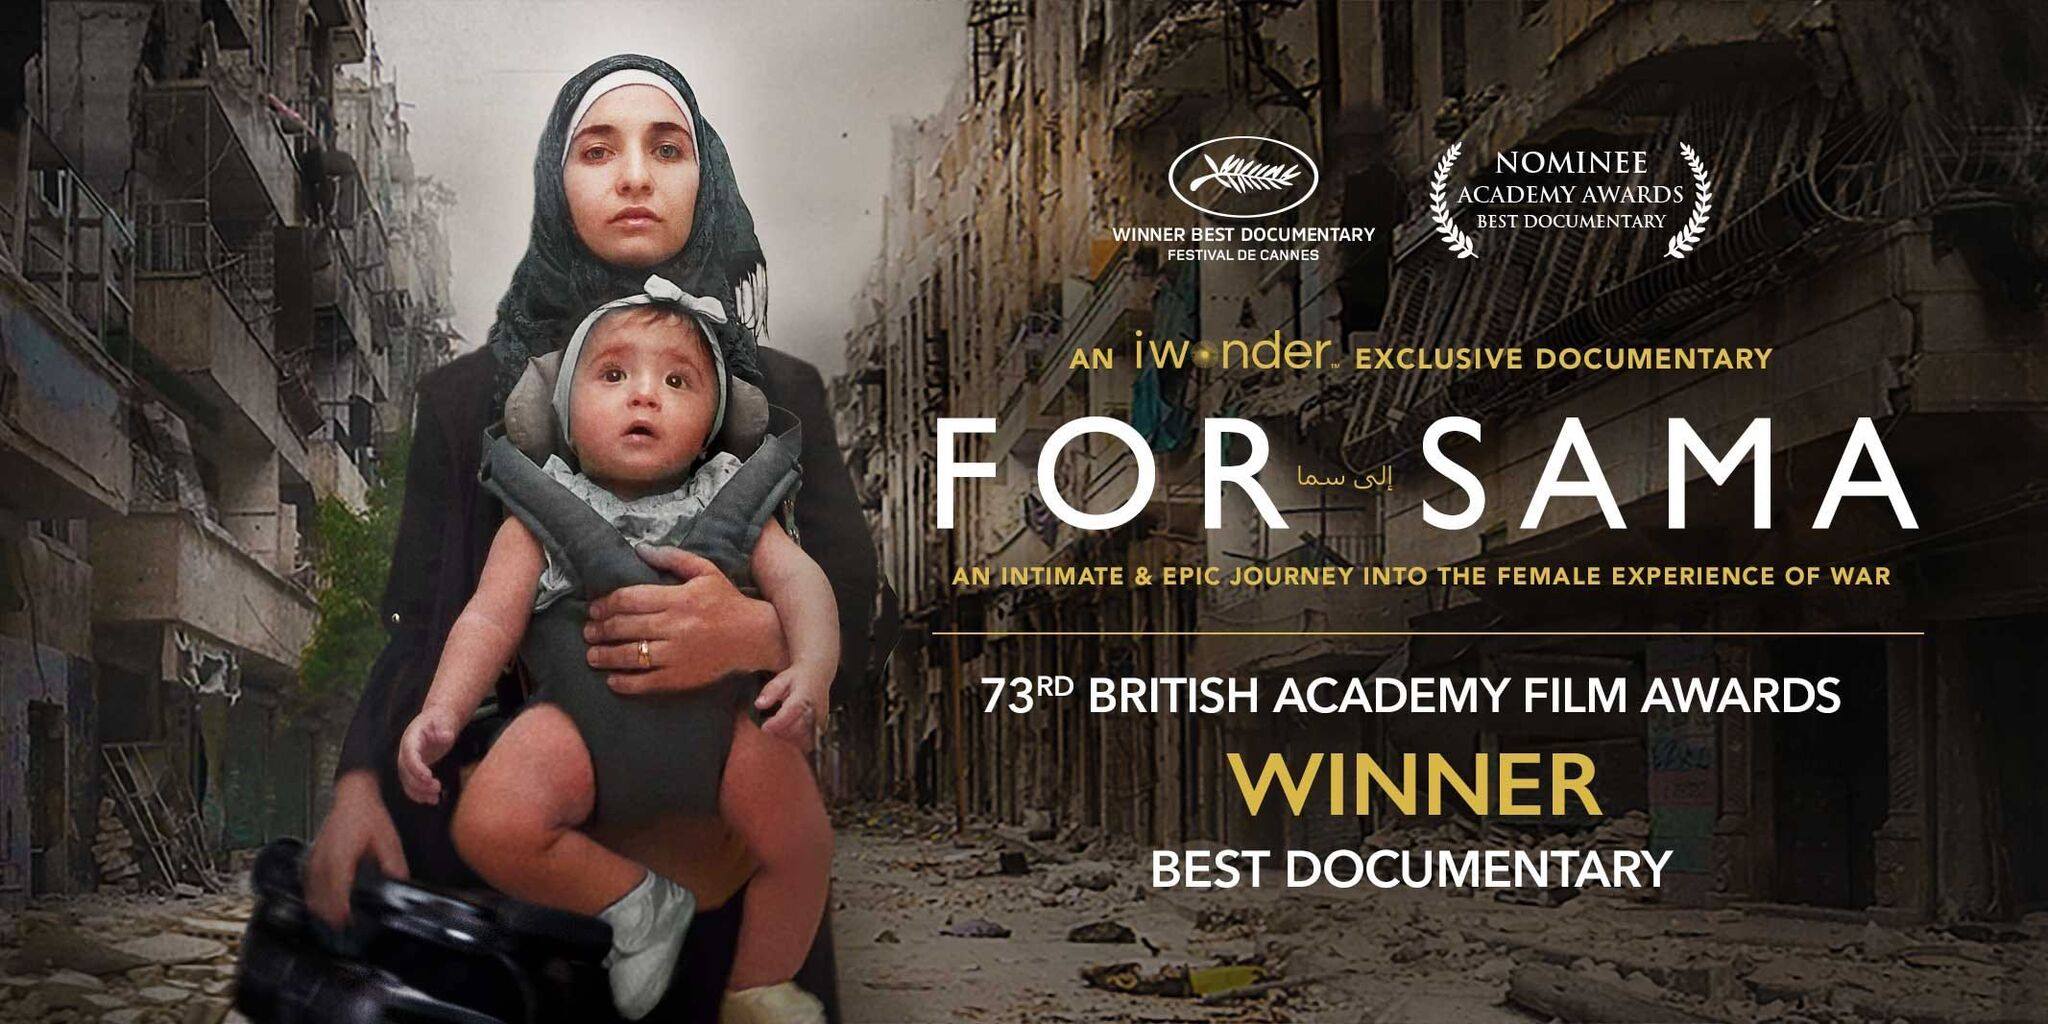 Oscar nominee "For Sama" exclusively on iwonder